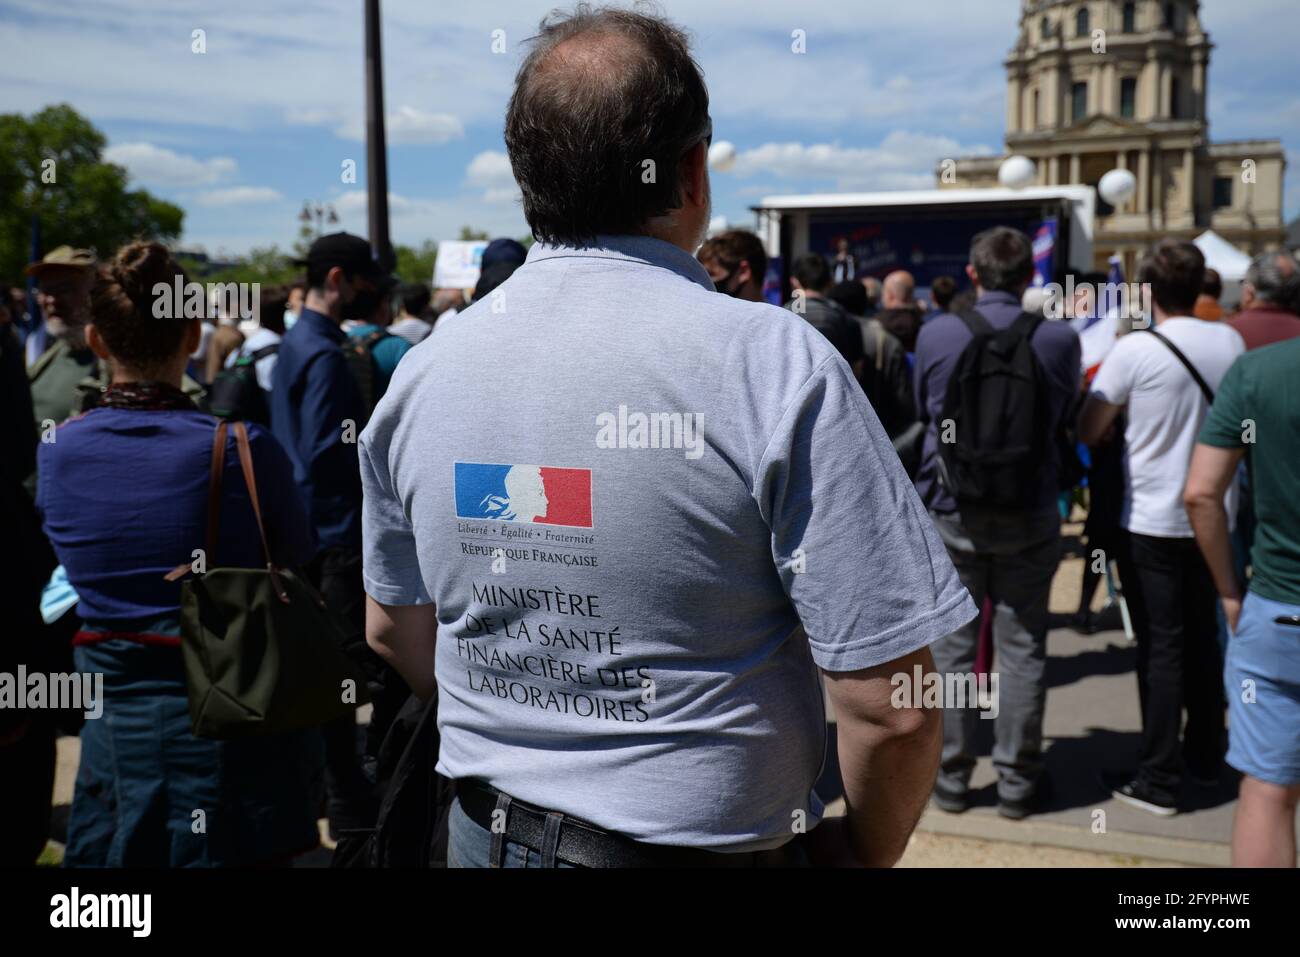 In Paris, the Democracy Festival gathered several hundred people who came to listen to 'pro-frexit' speeches to get out of the E.U. Stock Photo